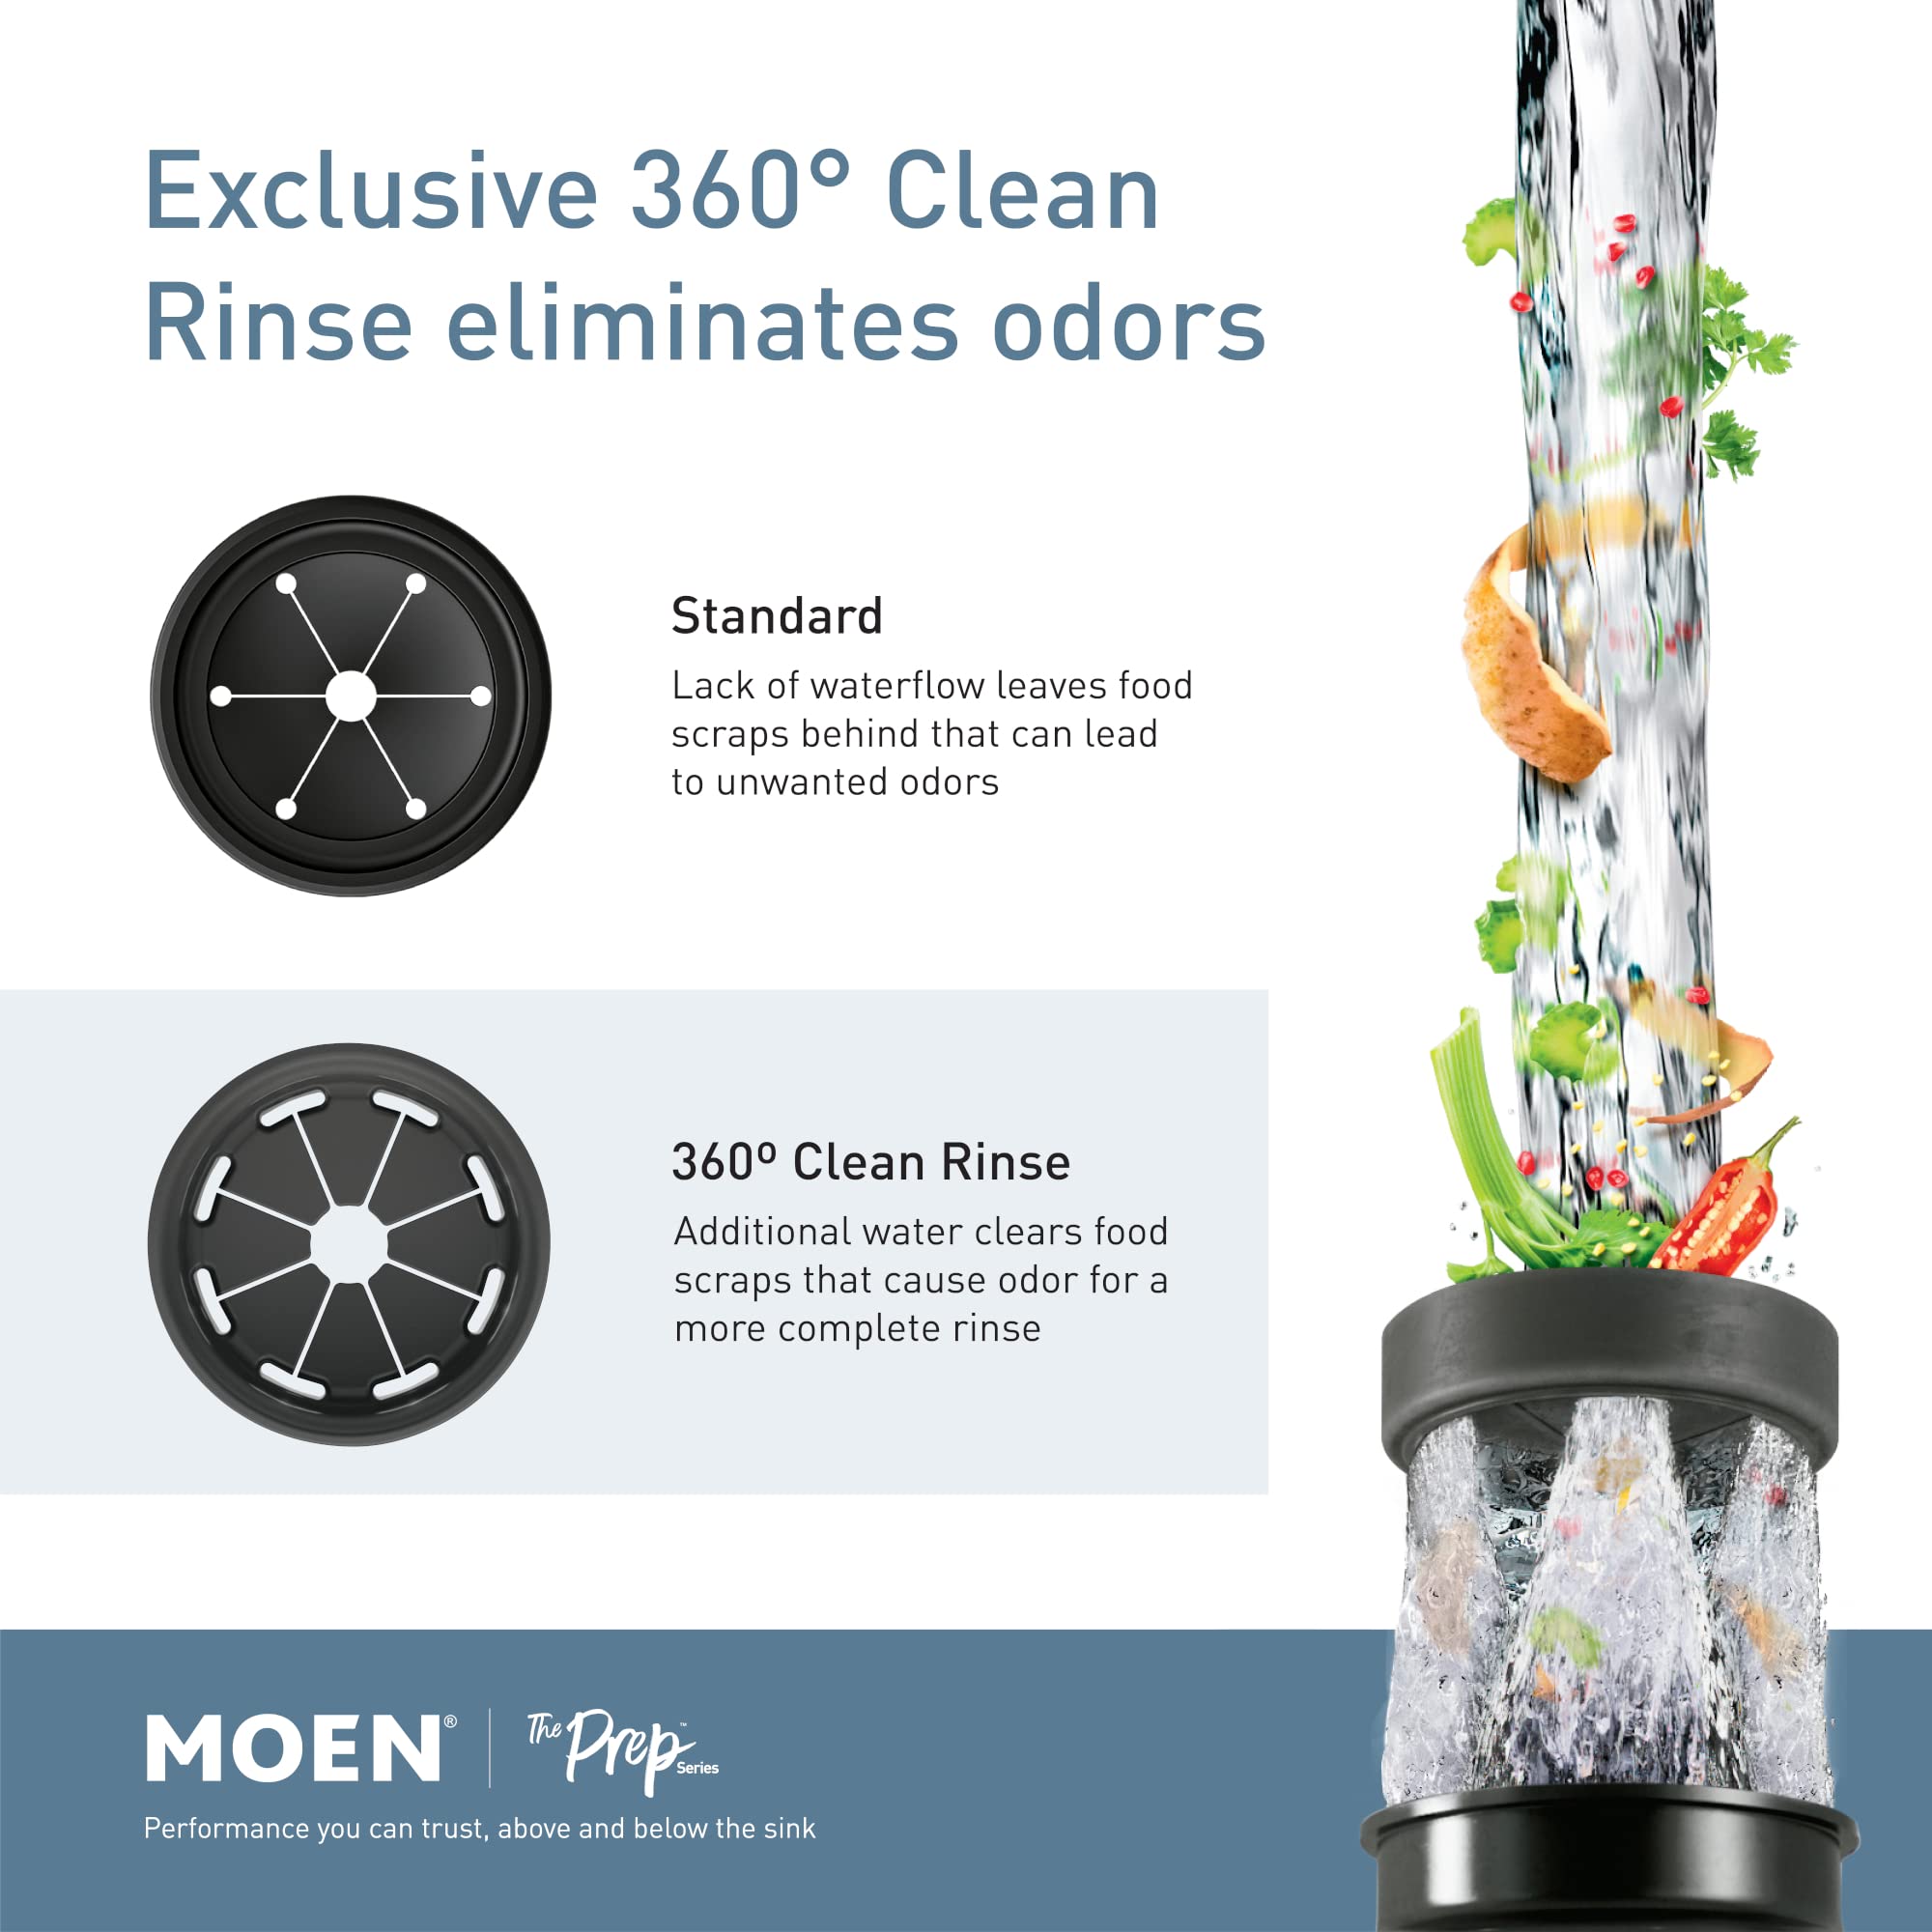 Moen Prep Series PRO 1/2 HP Continuous Feed Compact Garbage Disposal, Power Cord Included, GXP50C